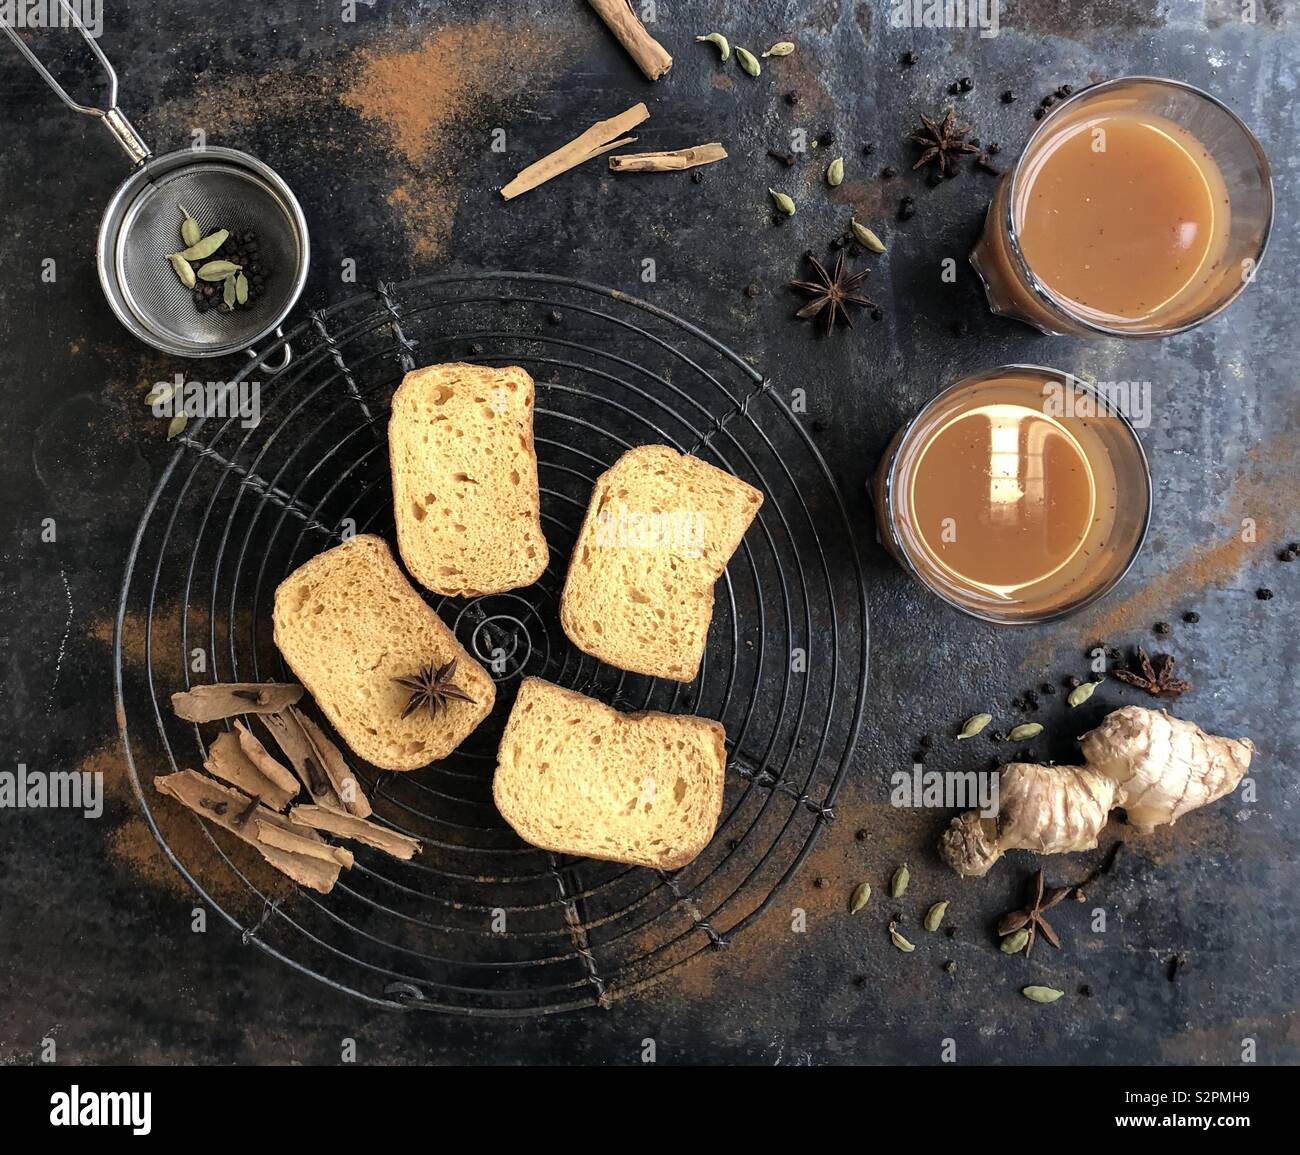 Indian Masala Chai with ginger & spice and all things nice! Stock Photo